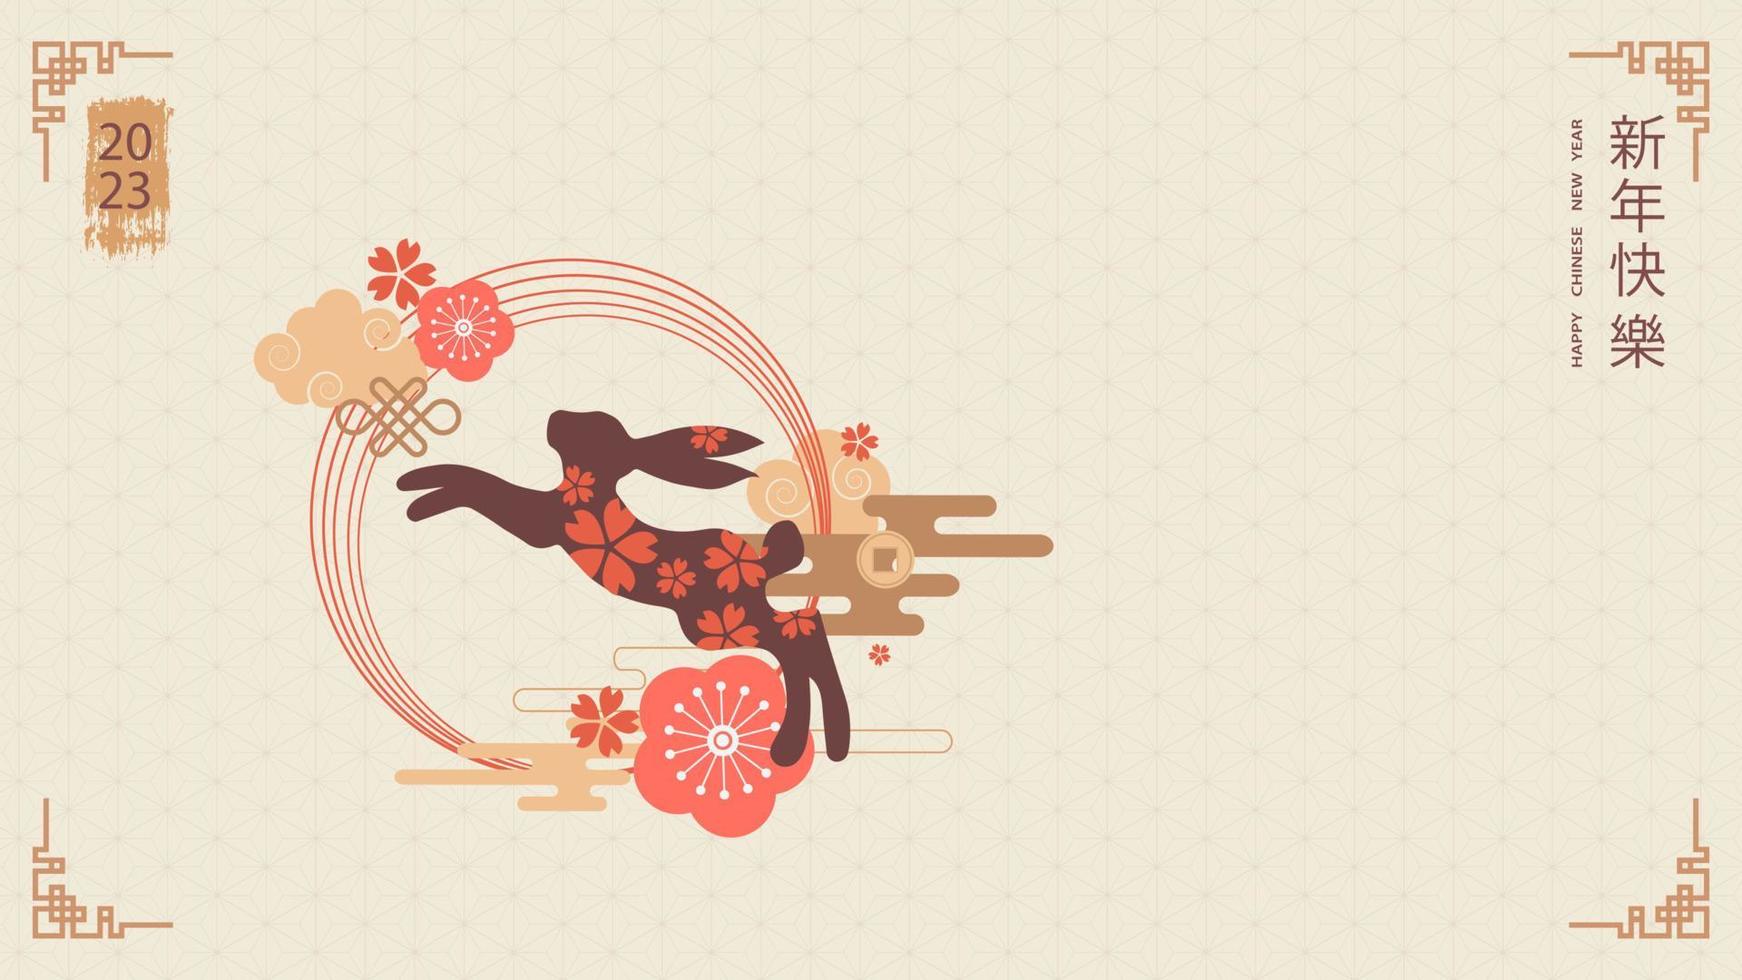 Banner template for Chinese New Year design with jumping rabbit and traditional patterns and elements. Translation from Chinese - Happy New Year, rabbit symbol. Vector illustration